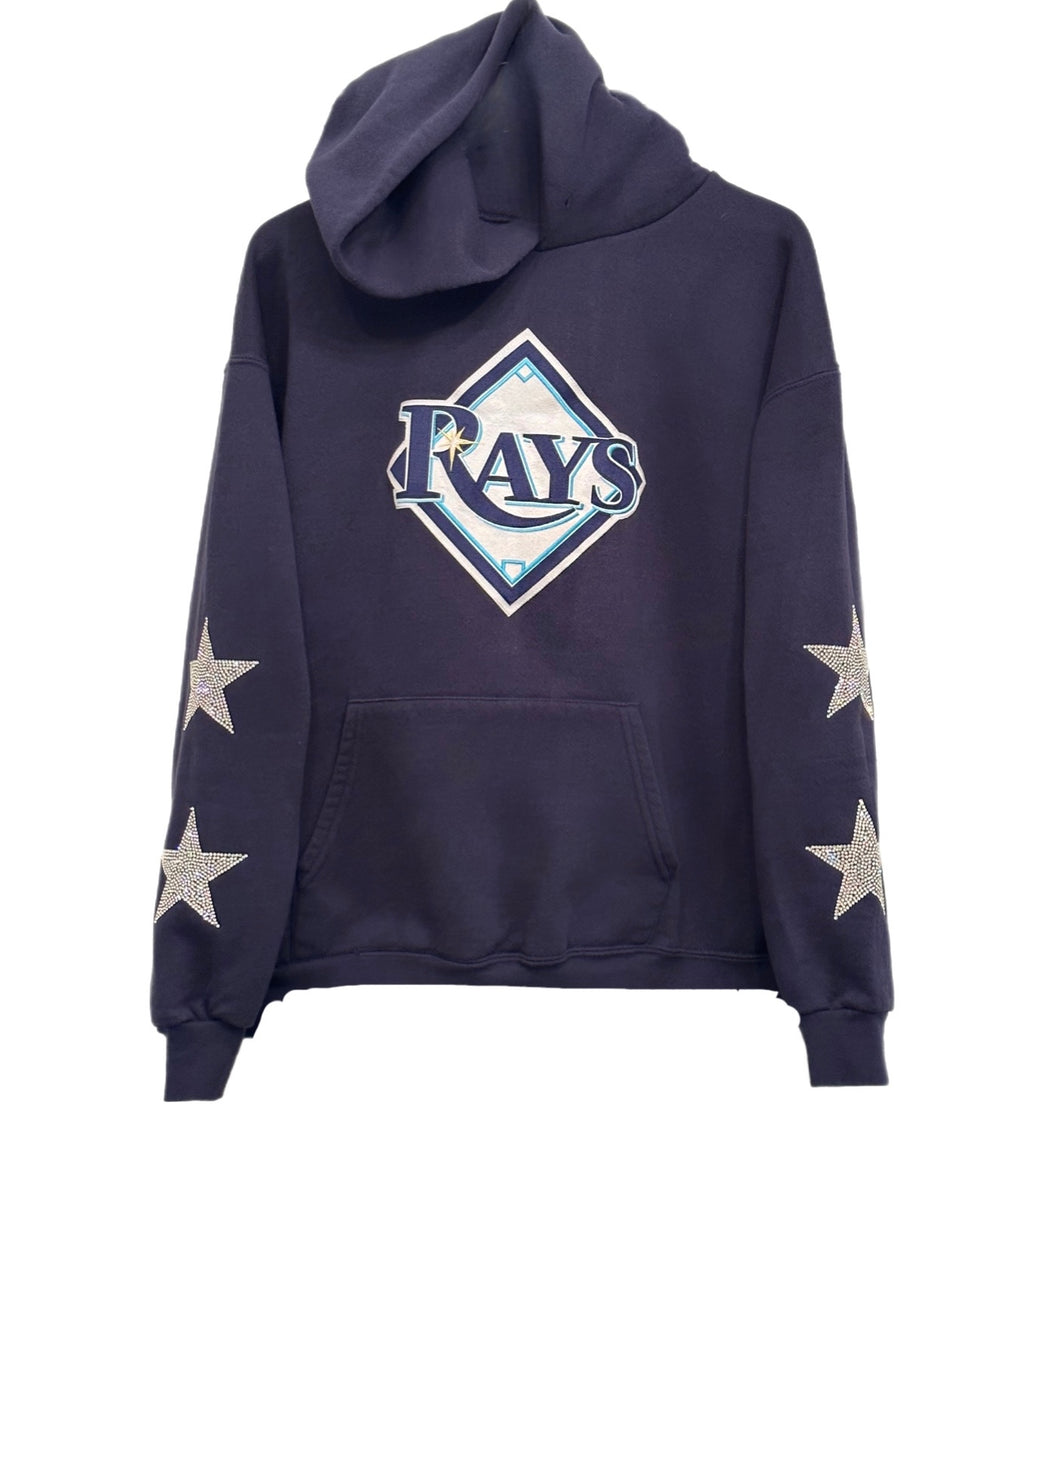 Tampa Bay Ray’s, MLB One of a KIND Vintage Hoodie with Crystal Star Design